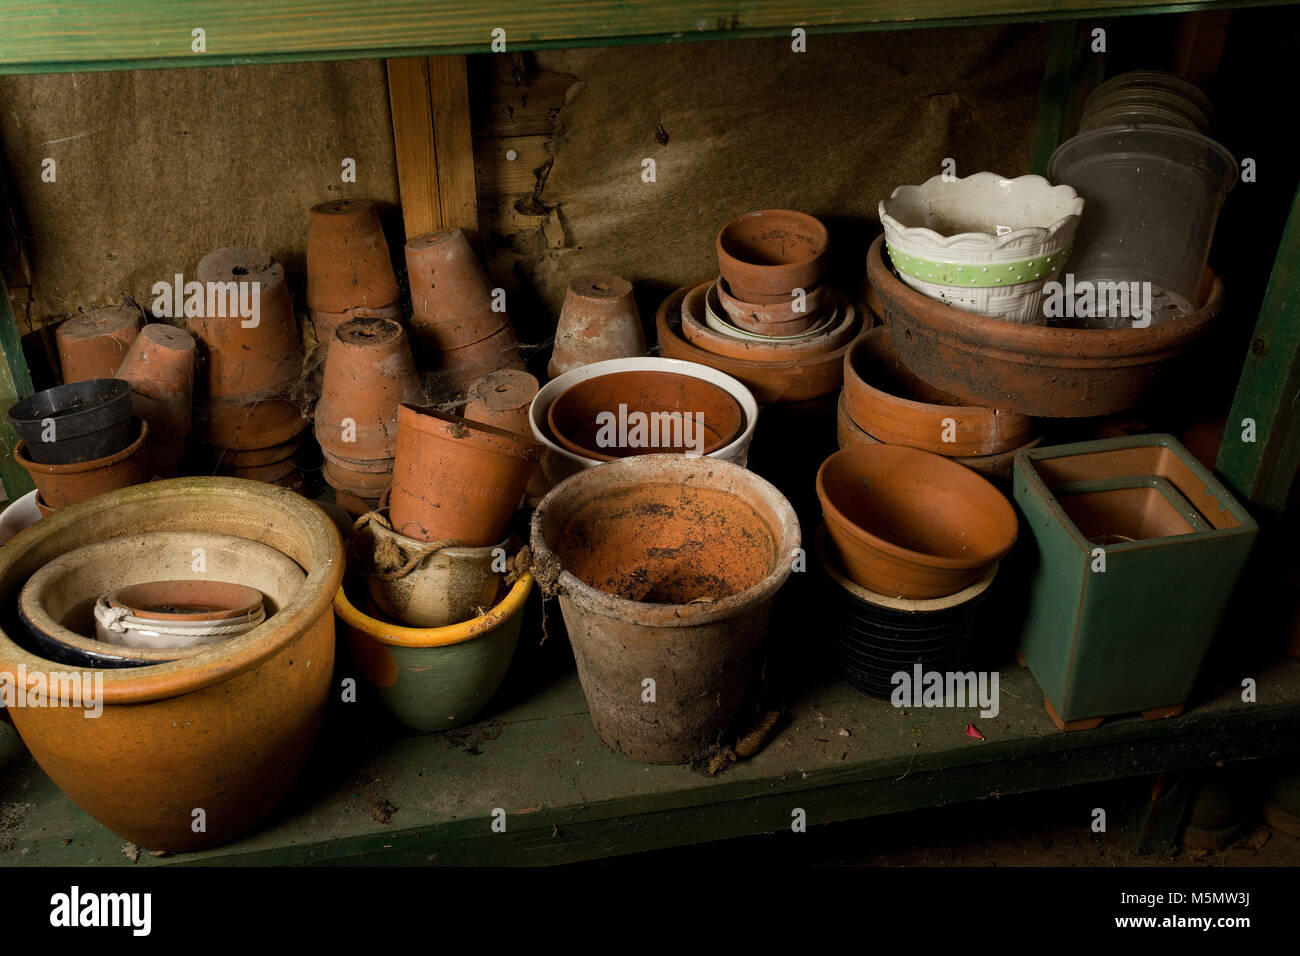 Old terracotta planting pots hidden under table in garden shed Stock Photo